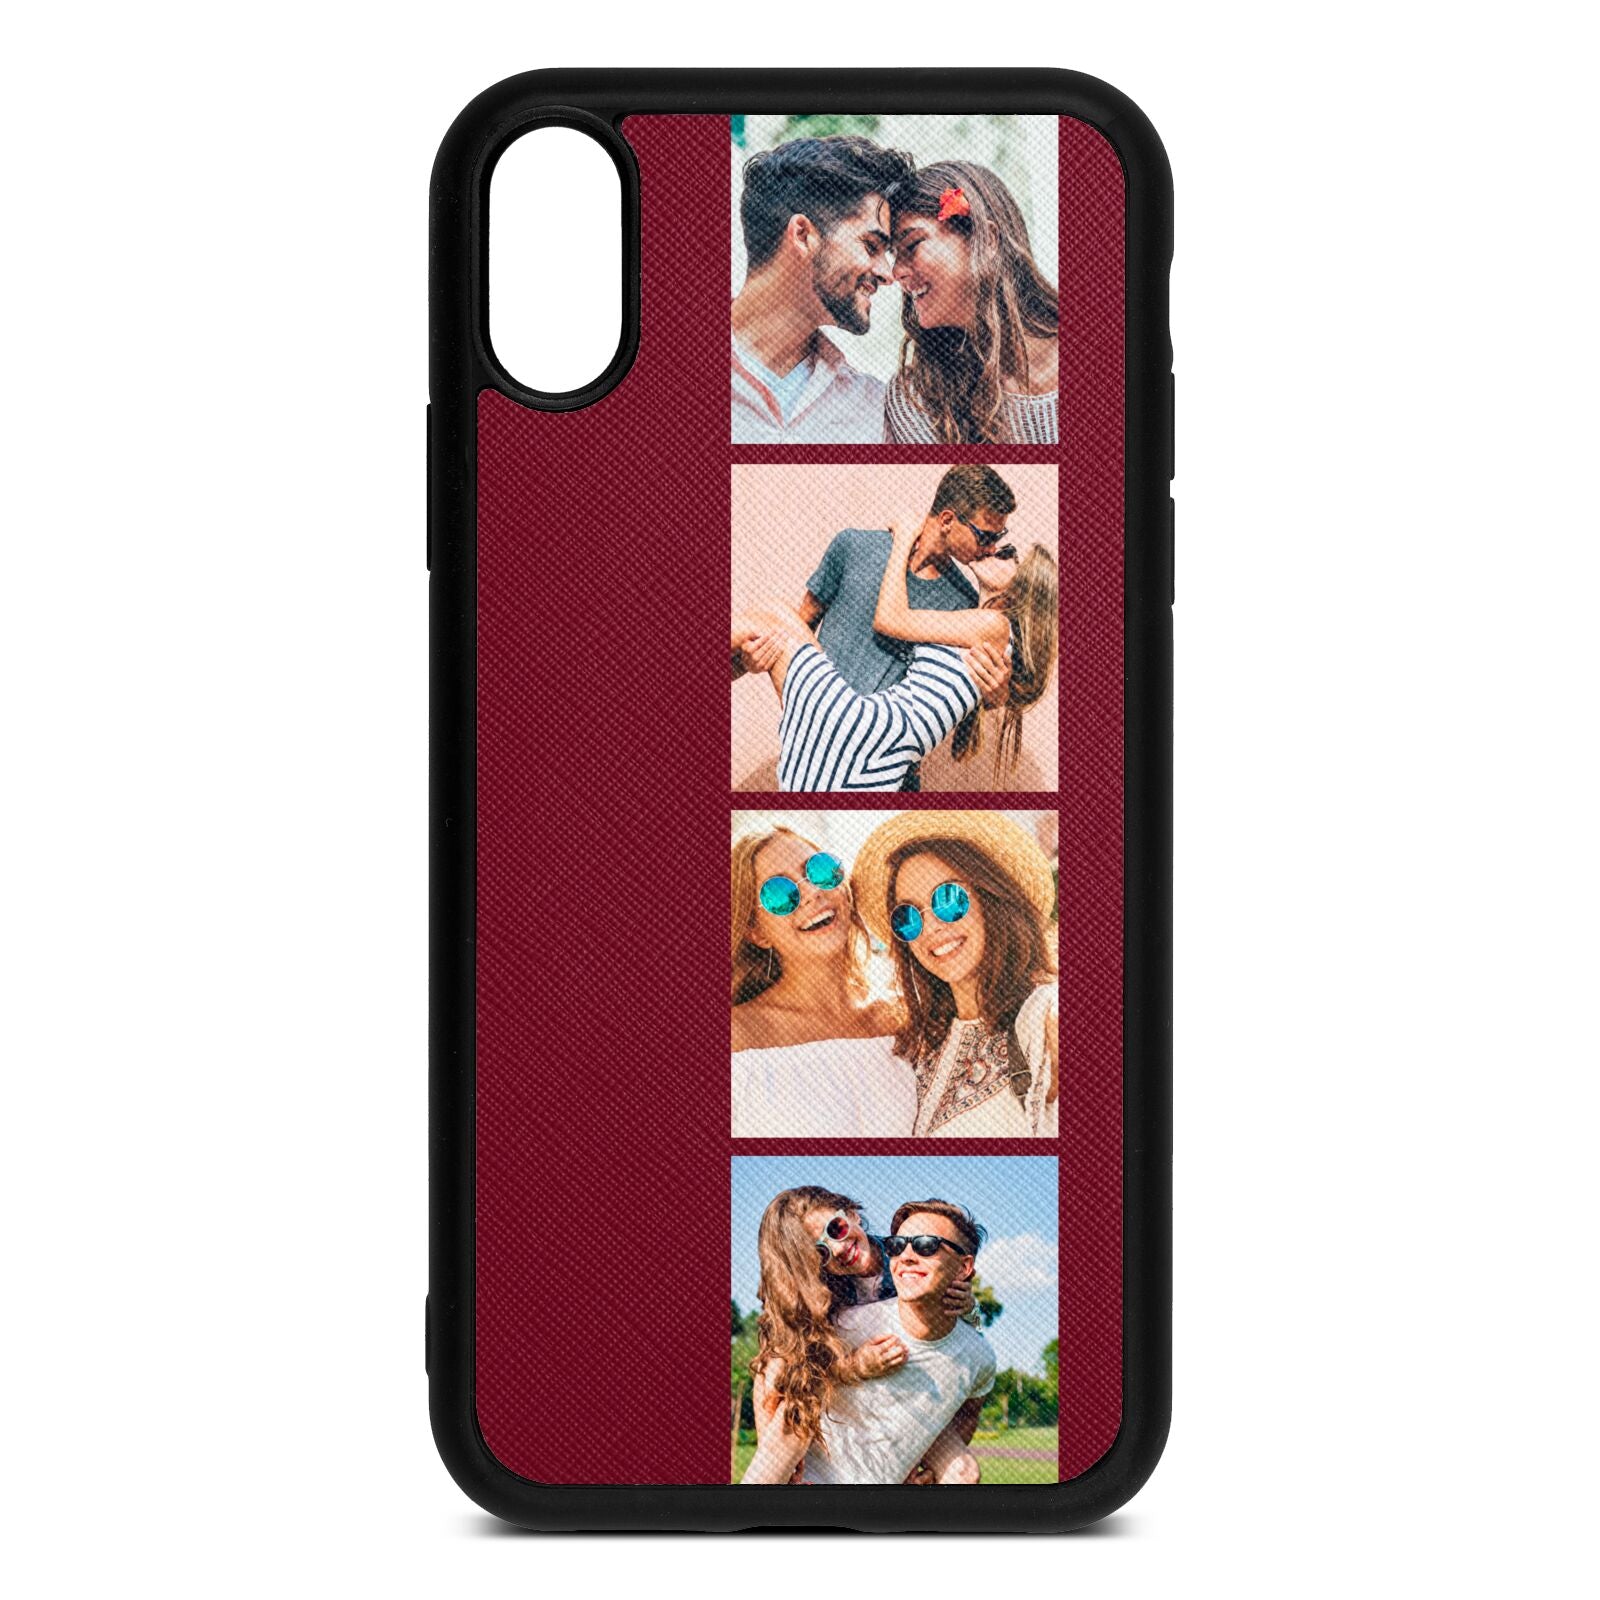 Photo Strip Montage Upload Wine Red Saffiano Leather iPhone Xr Case